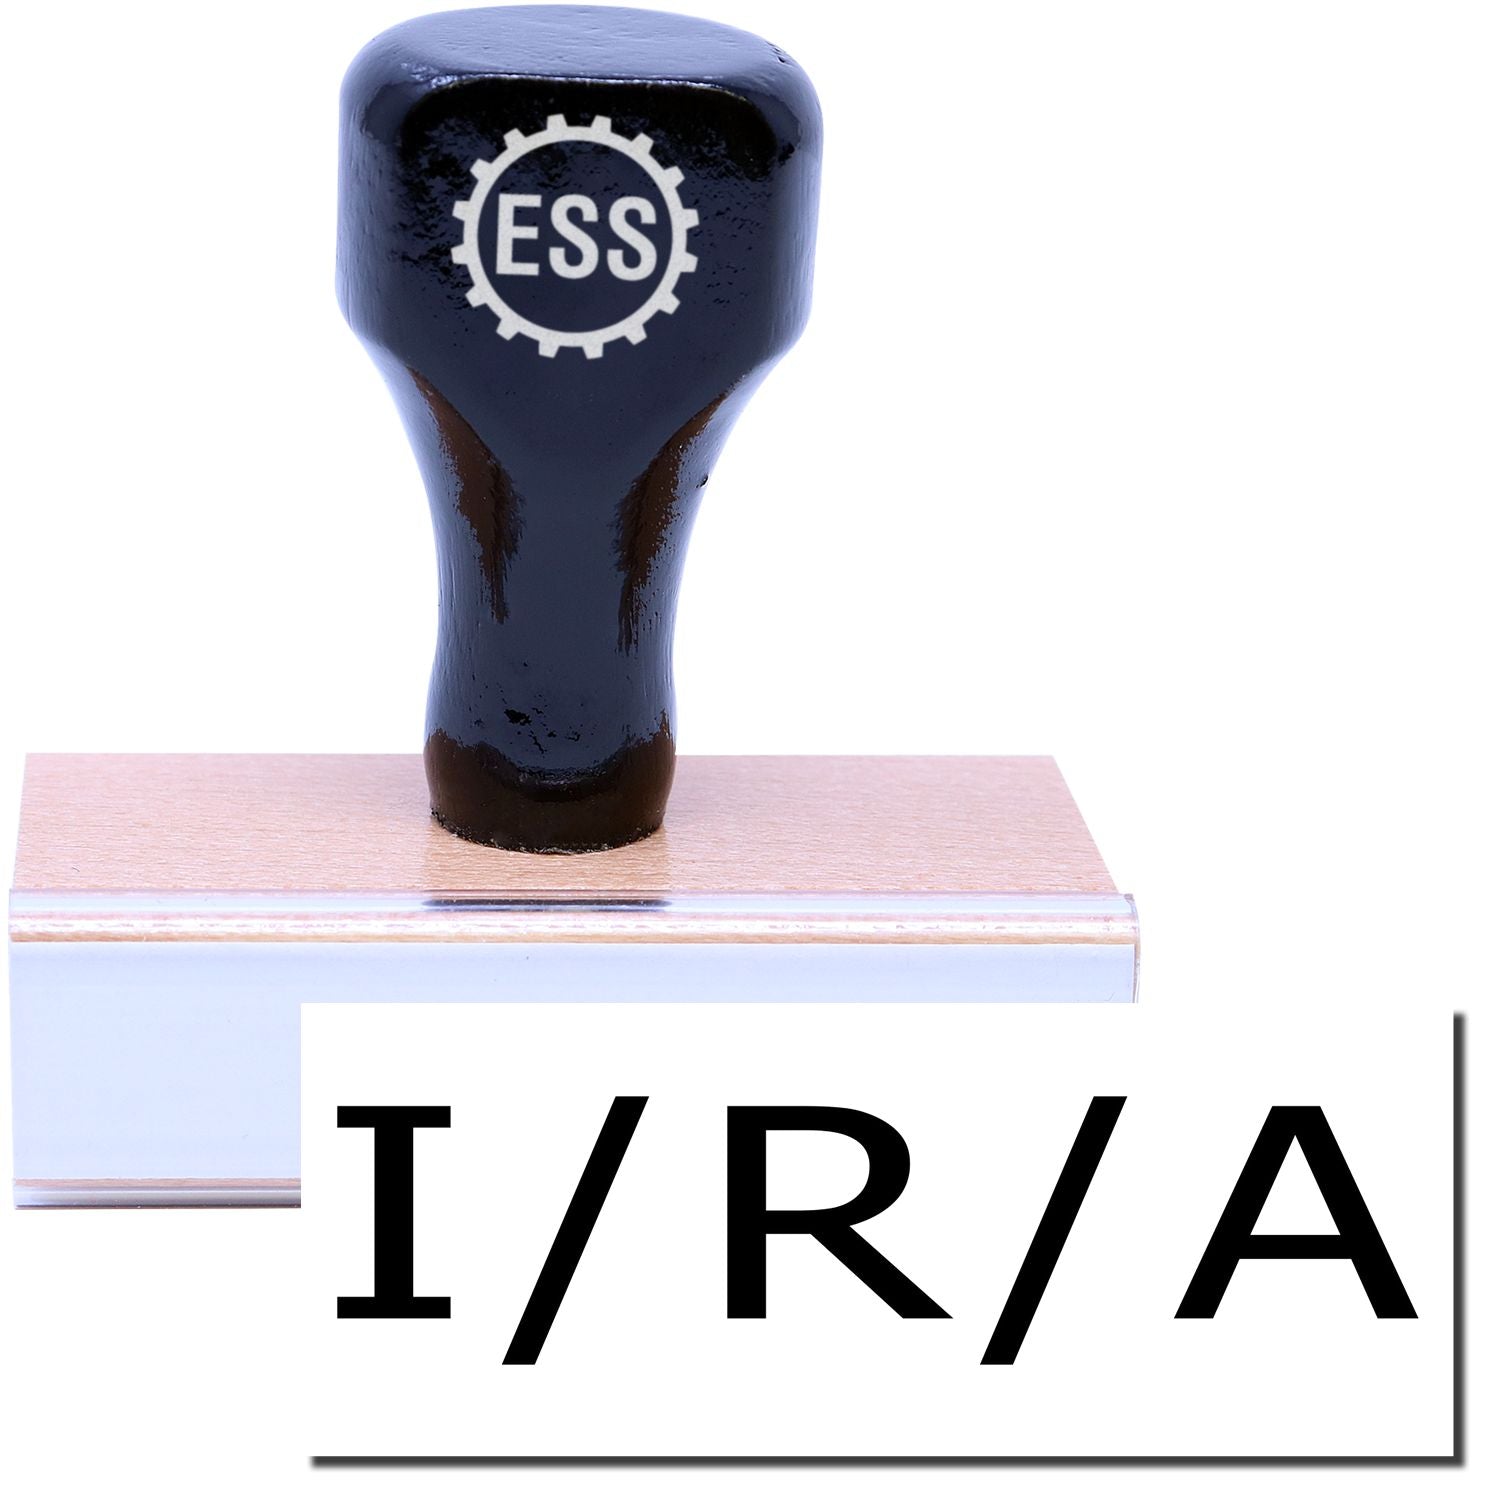 A stock office rubber stamp with a stamped image showing how the text "I / R / A" in a large font is displayed after stamping.